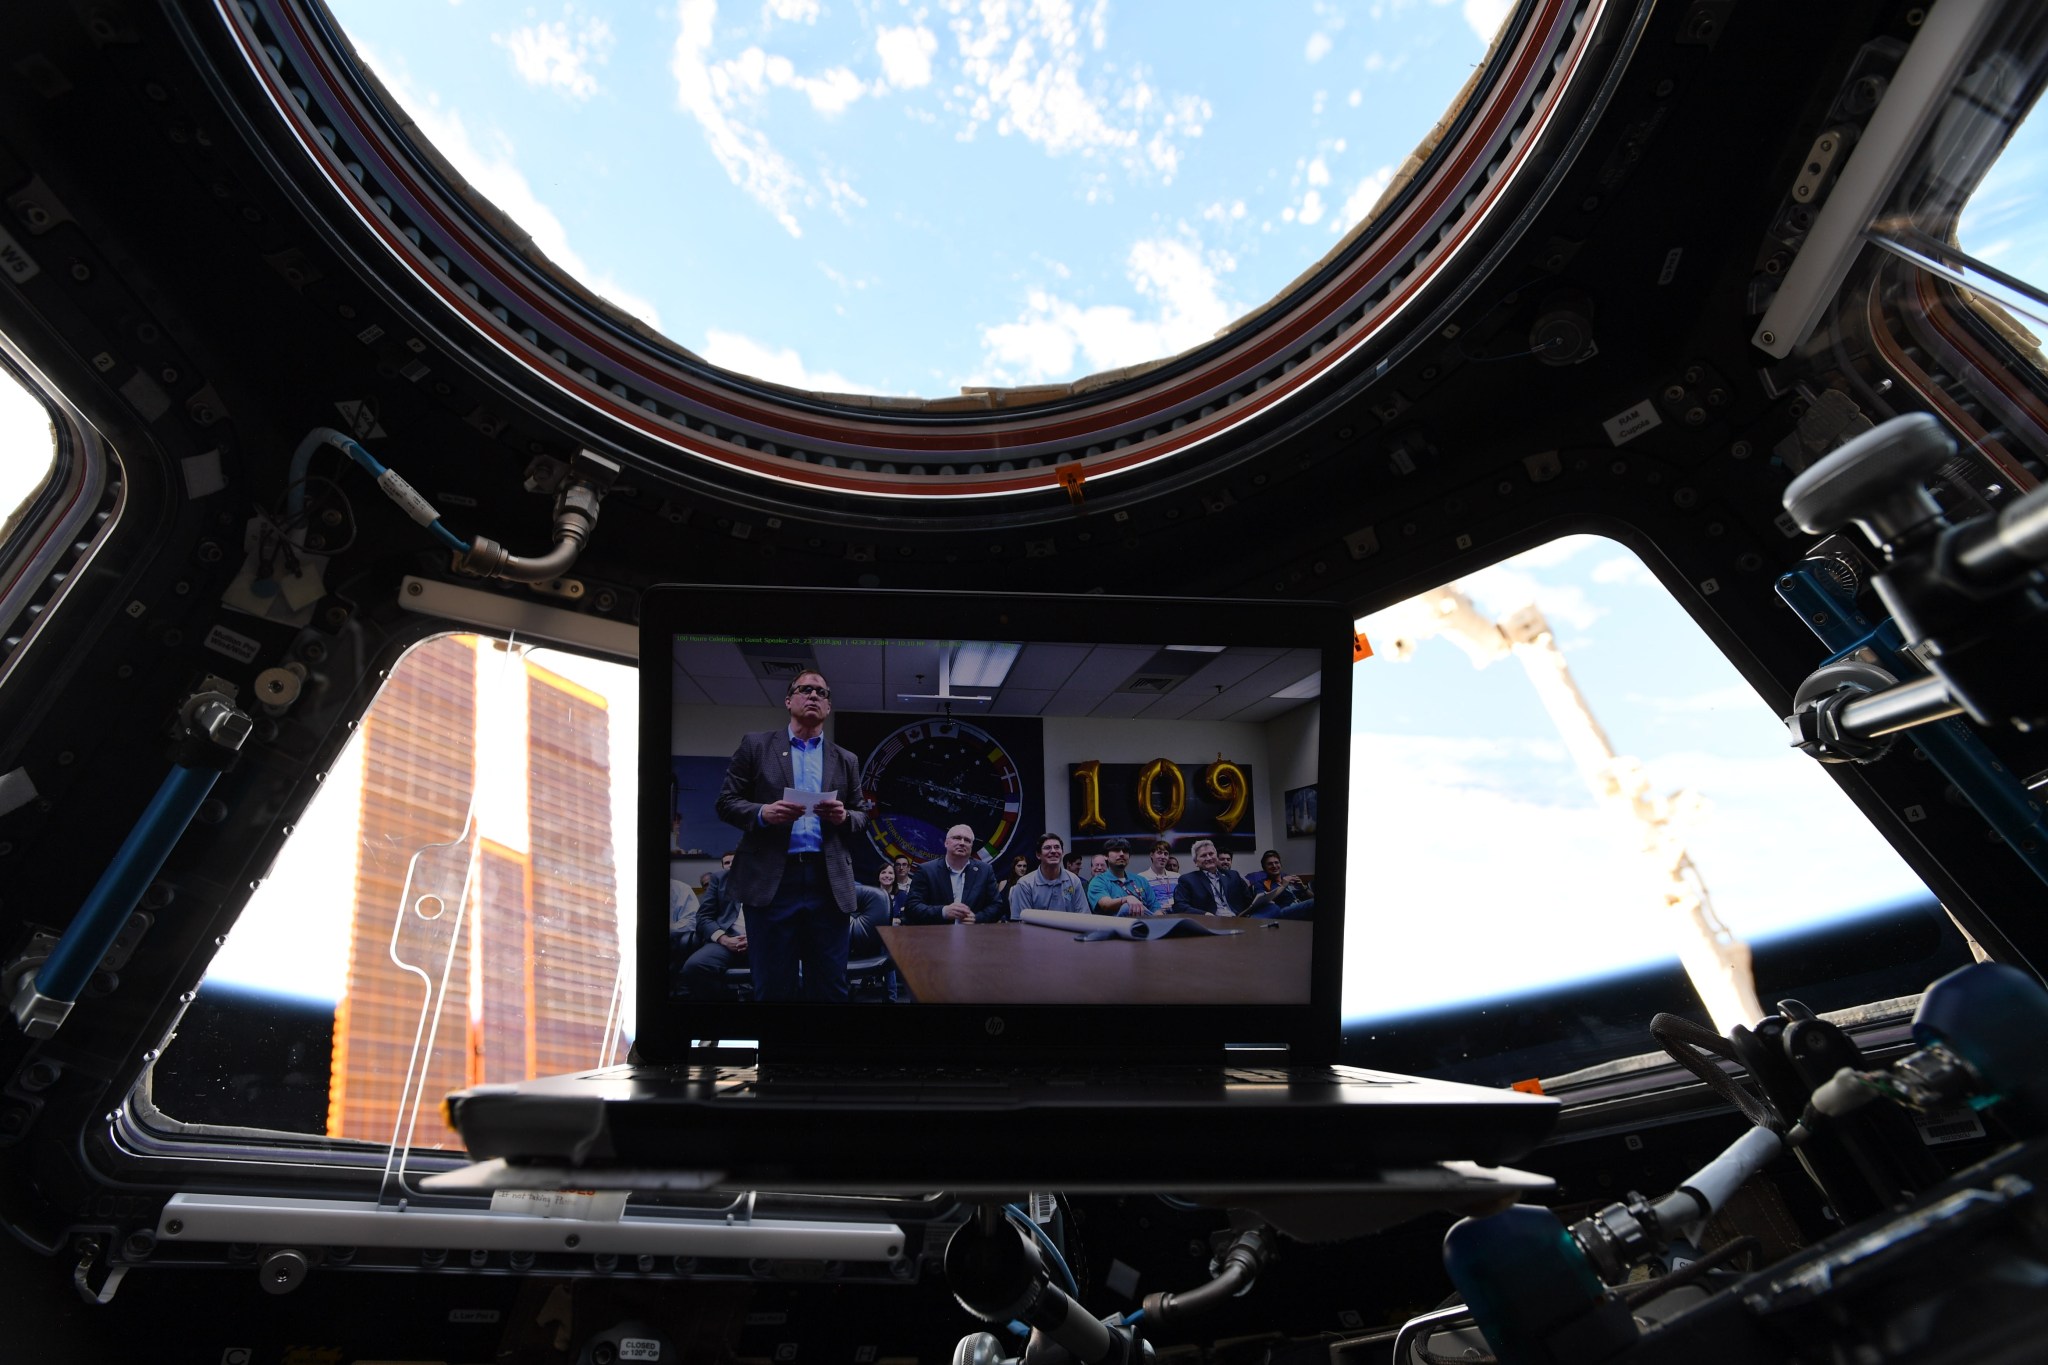 During a video call Feb. 23 with crew members aboard the ISS, Jonathan Pettus appears on a screen mounted in the cuppola.